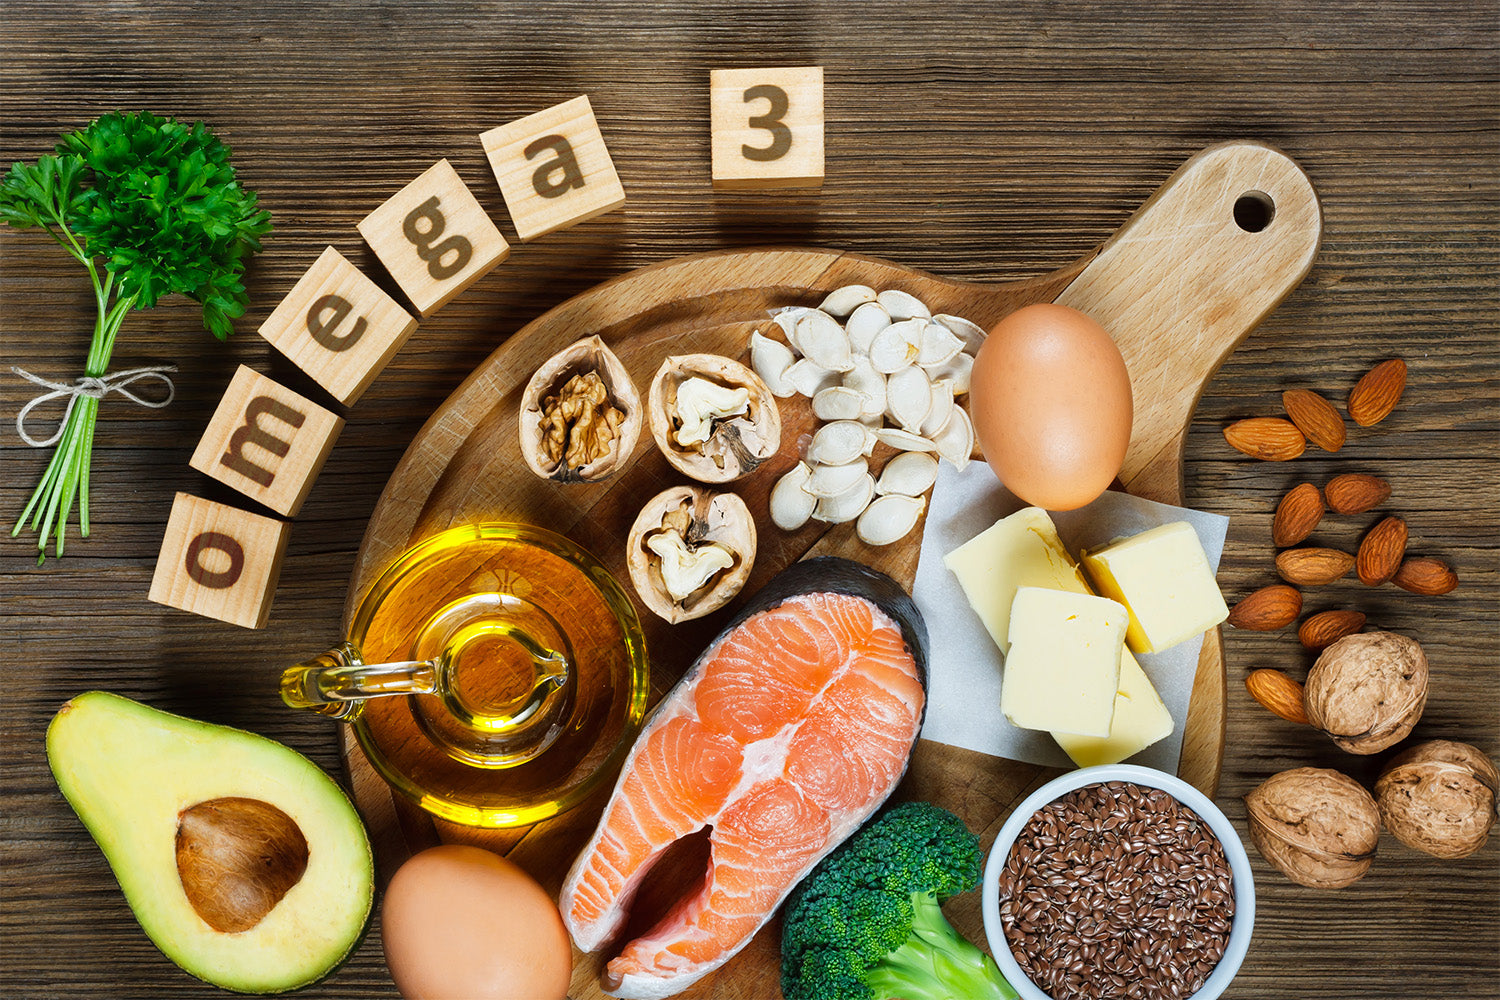 12 Foods That Are Very High in Omega-3